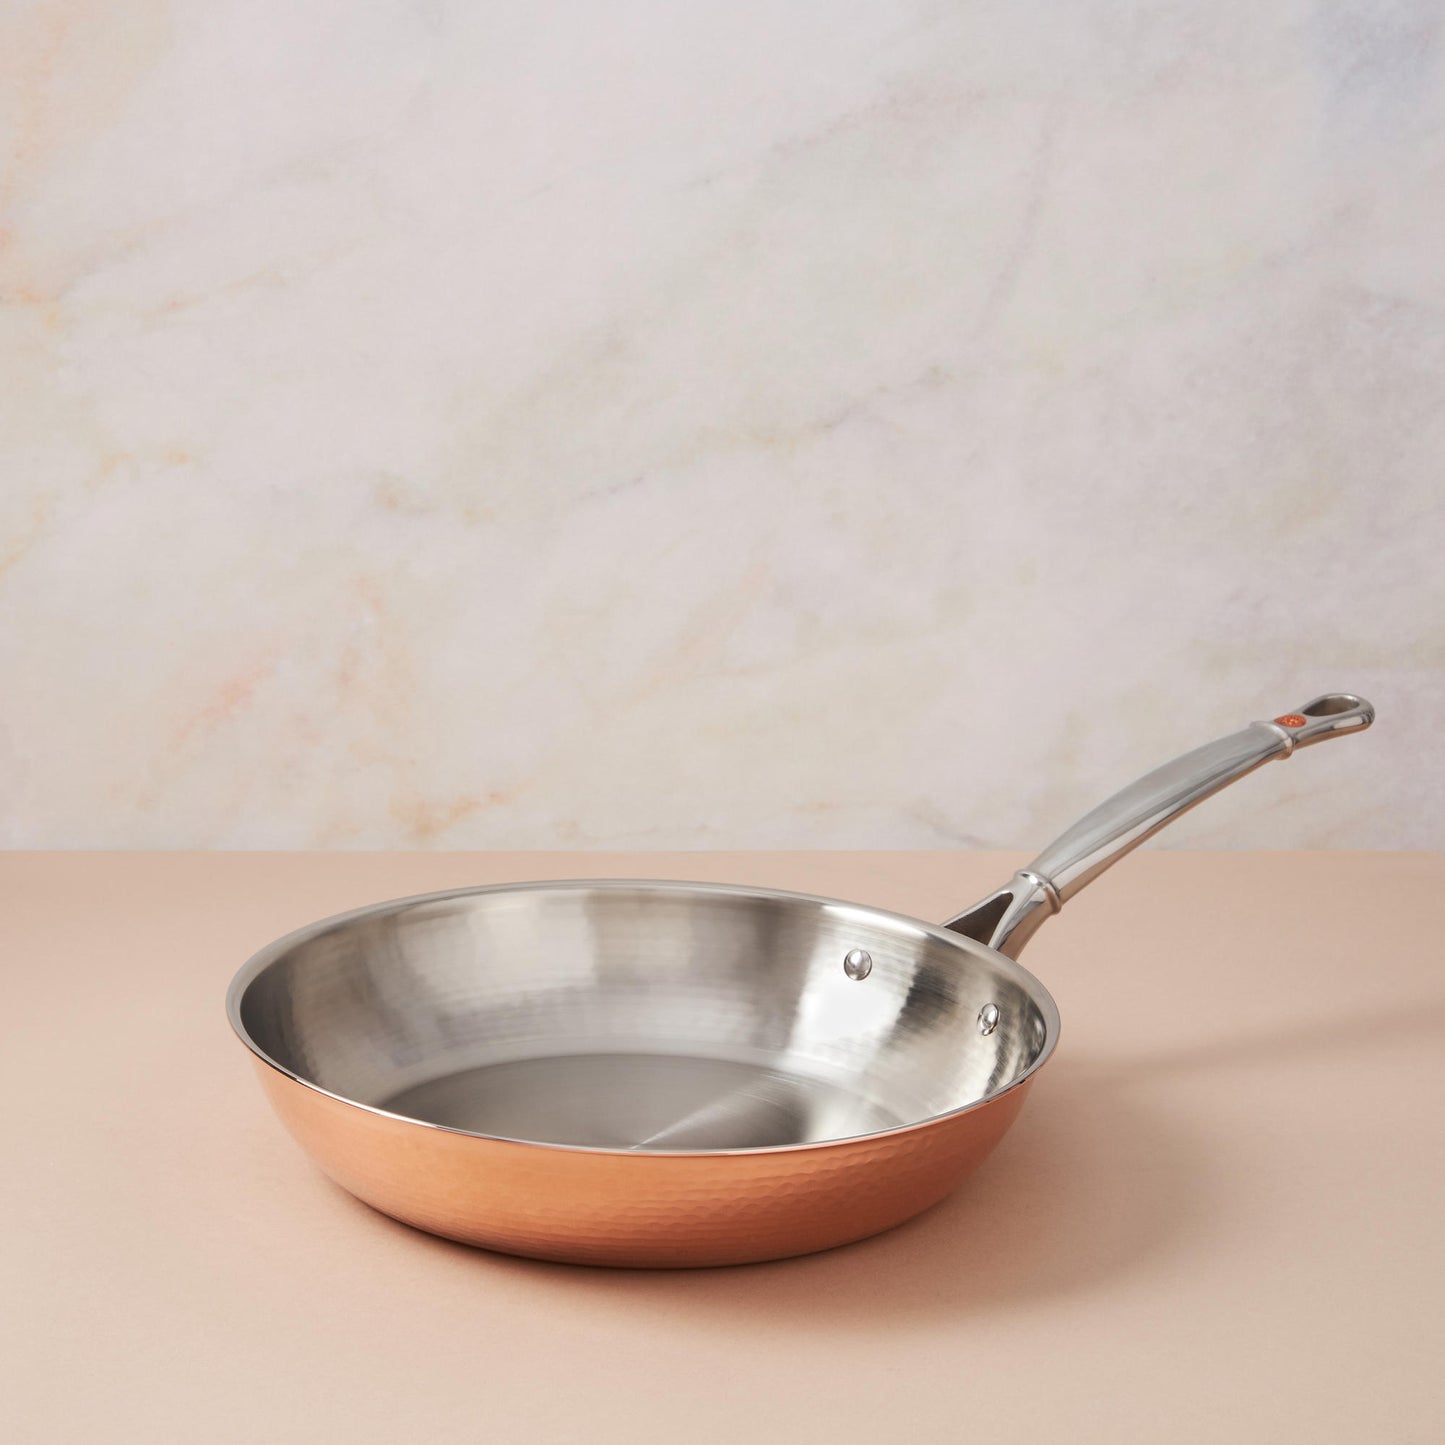 Frying Pan in hammered copper with stainless steel lining from Ruffoni